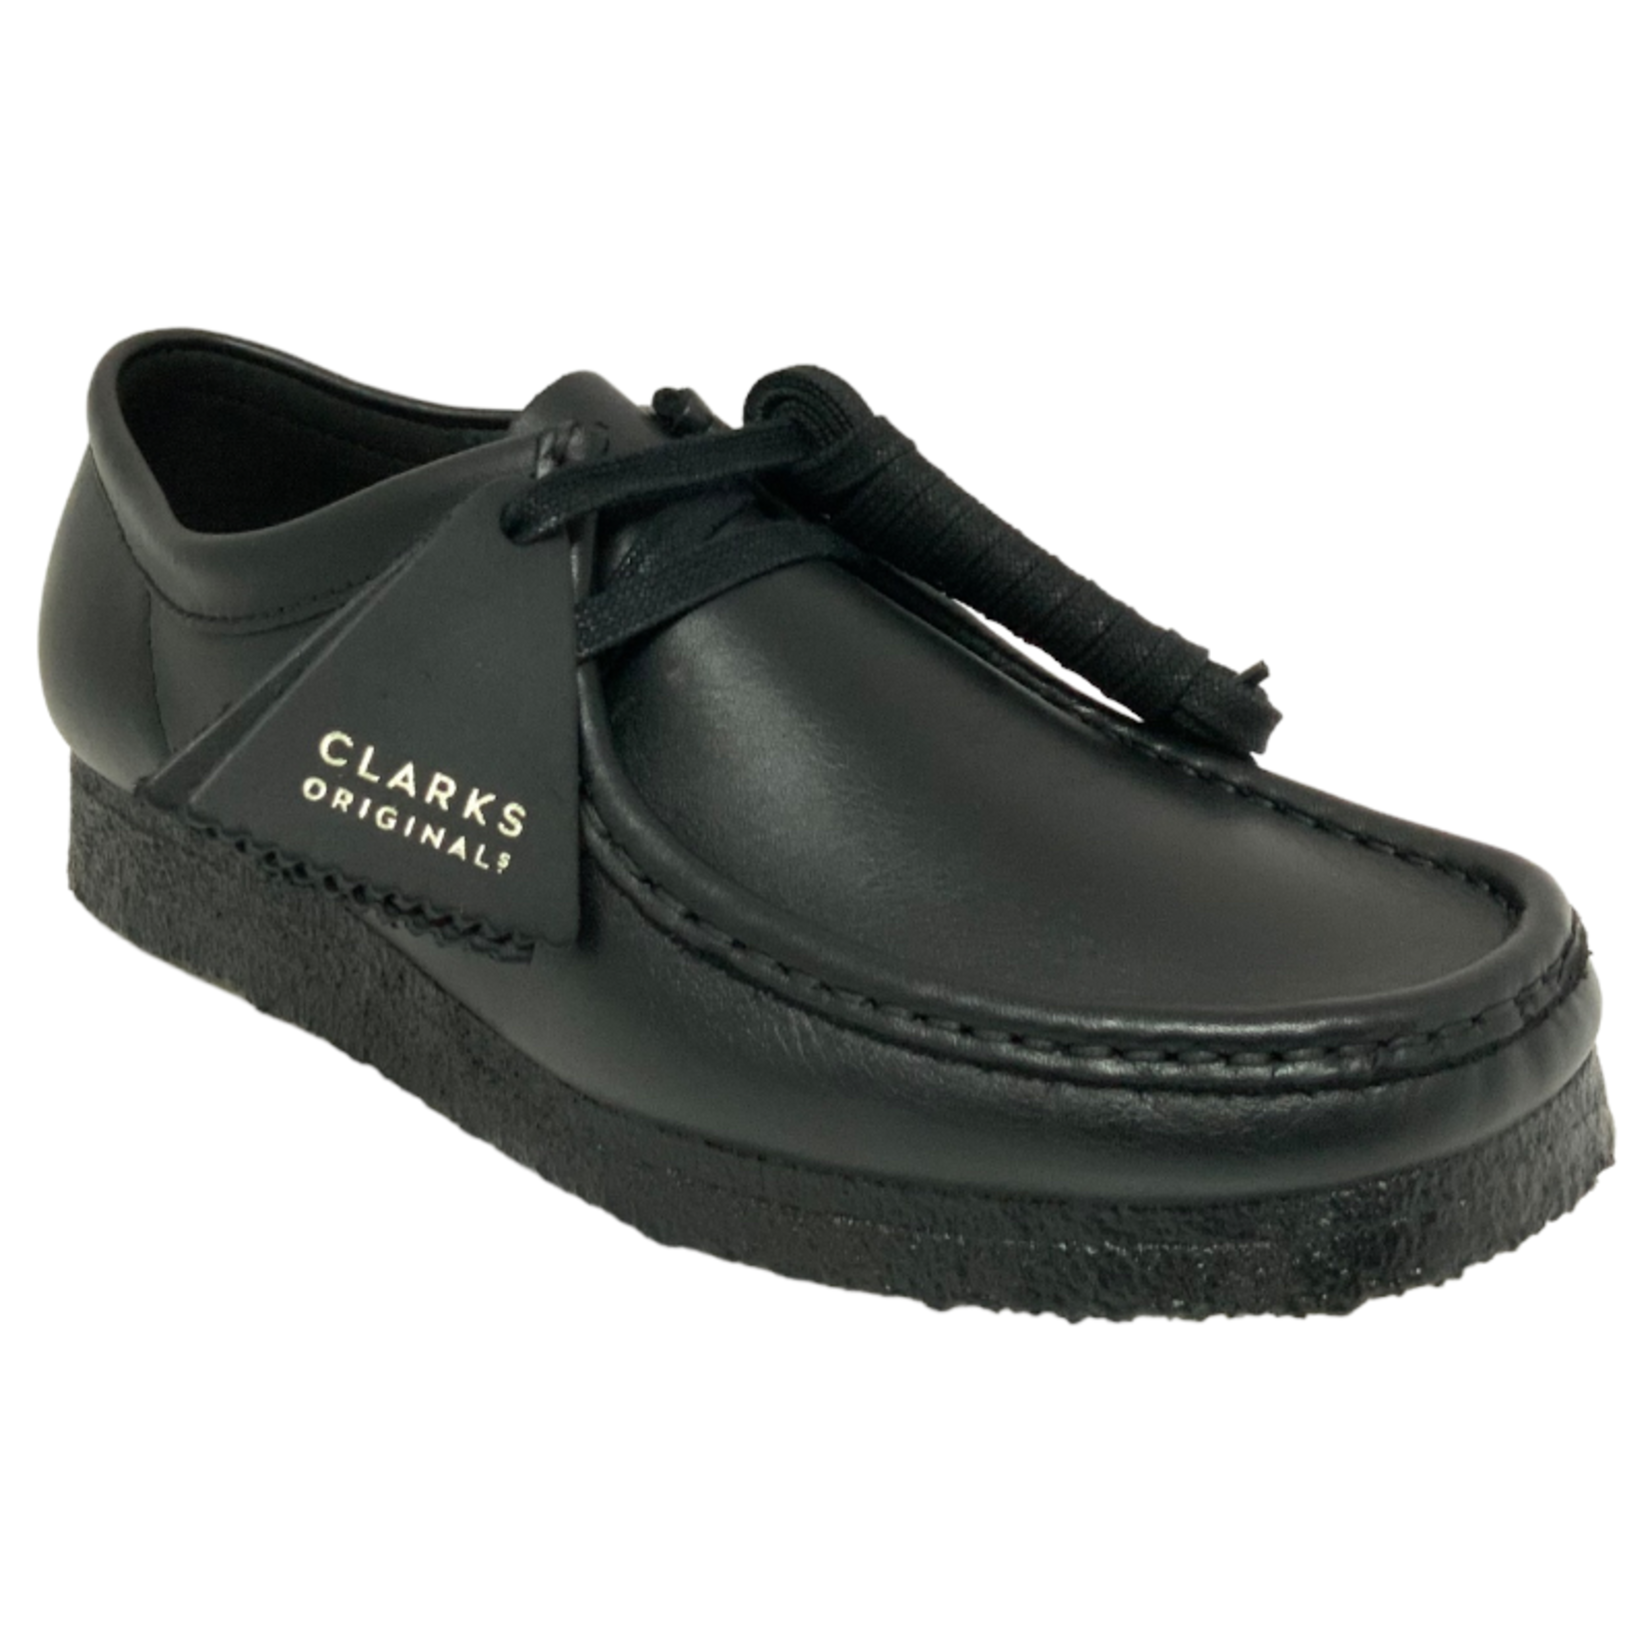 CLARKS CLARKS CASUAL LACE UP SHOE WALLABEE 26155514